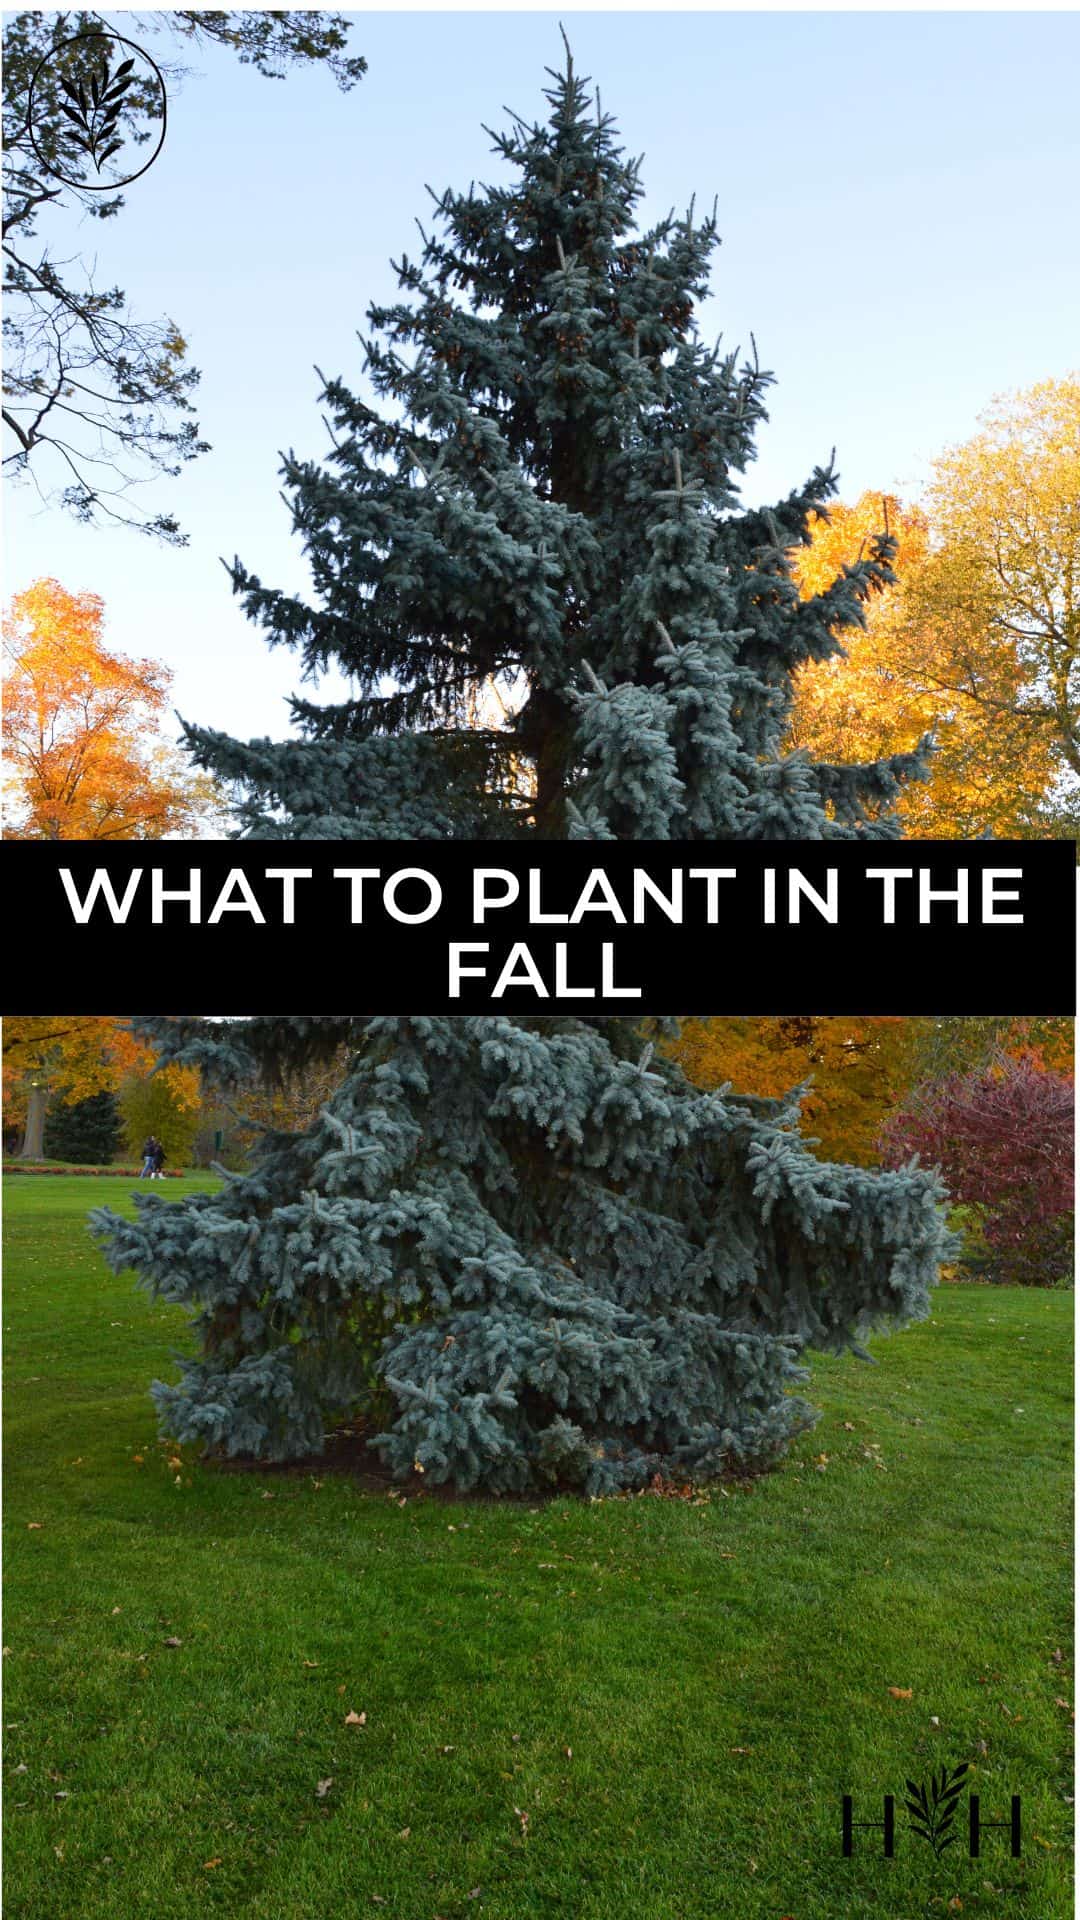 What to plant in the fall via @home4theharvest